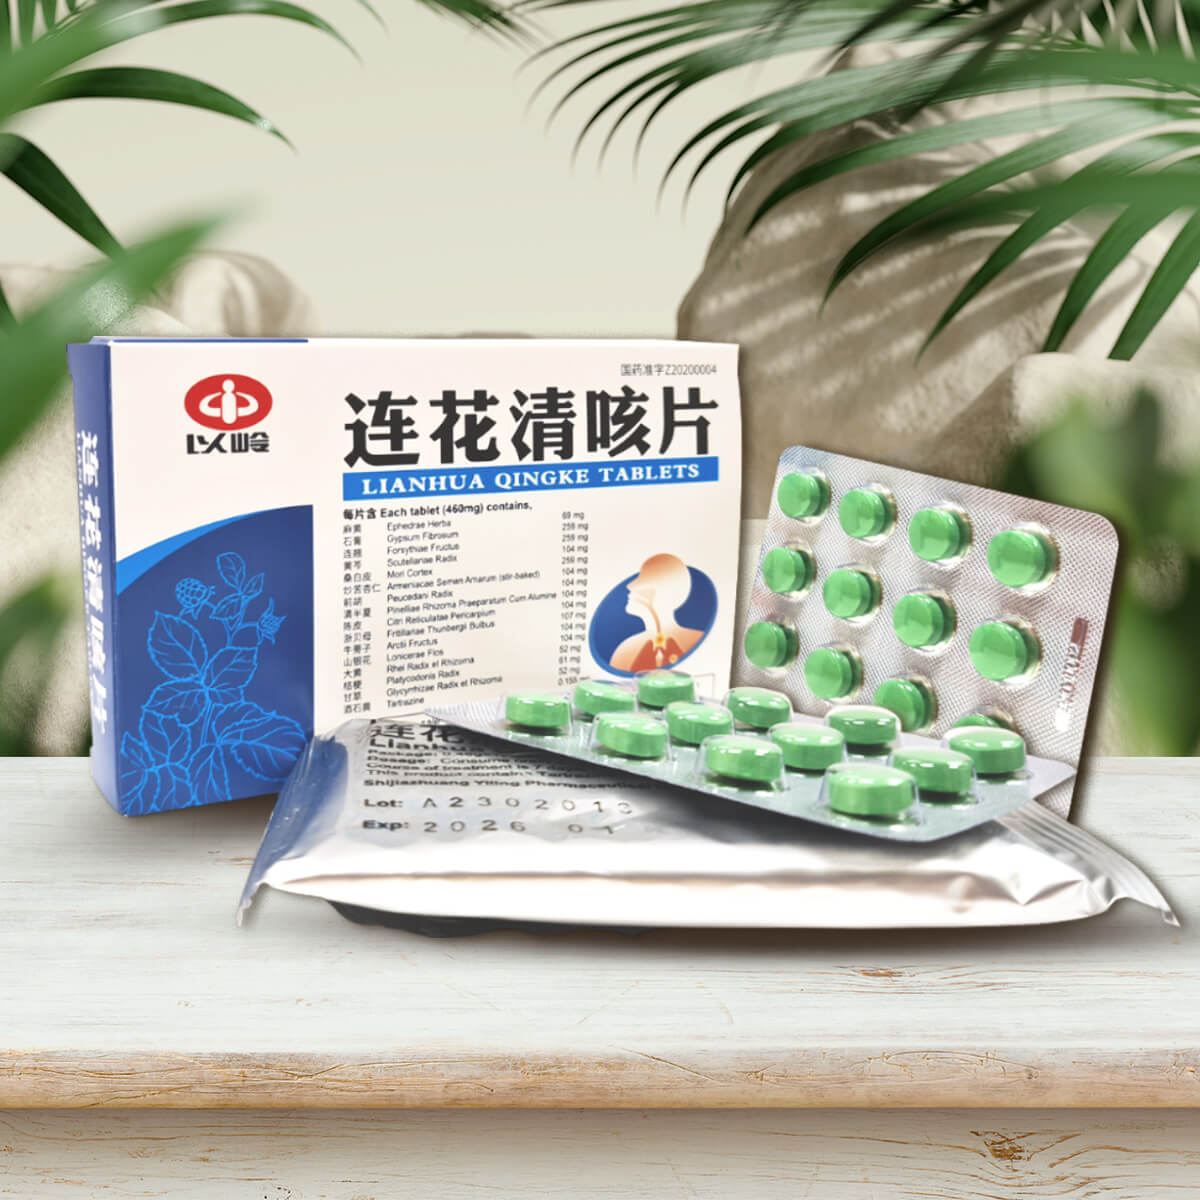 Lianhua Qingke Pian clear up cough thoroughly, stop coughing, cough up phlegm stuck in throat, cough with phlegm, chinese medicine for cough and phlegm, chinese cough medicine near me, lianhua medicine for cough, chinese cough pills